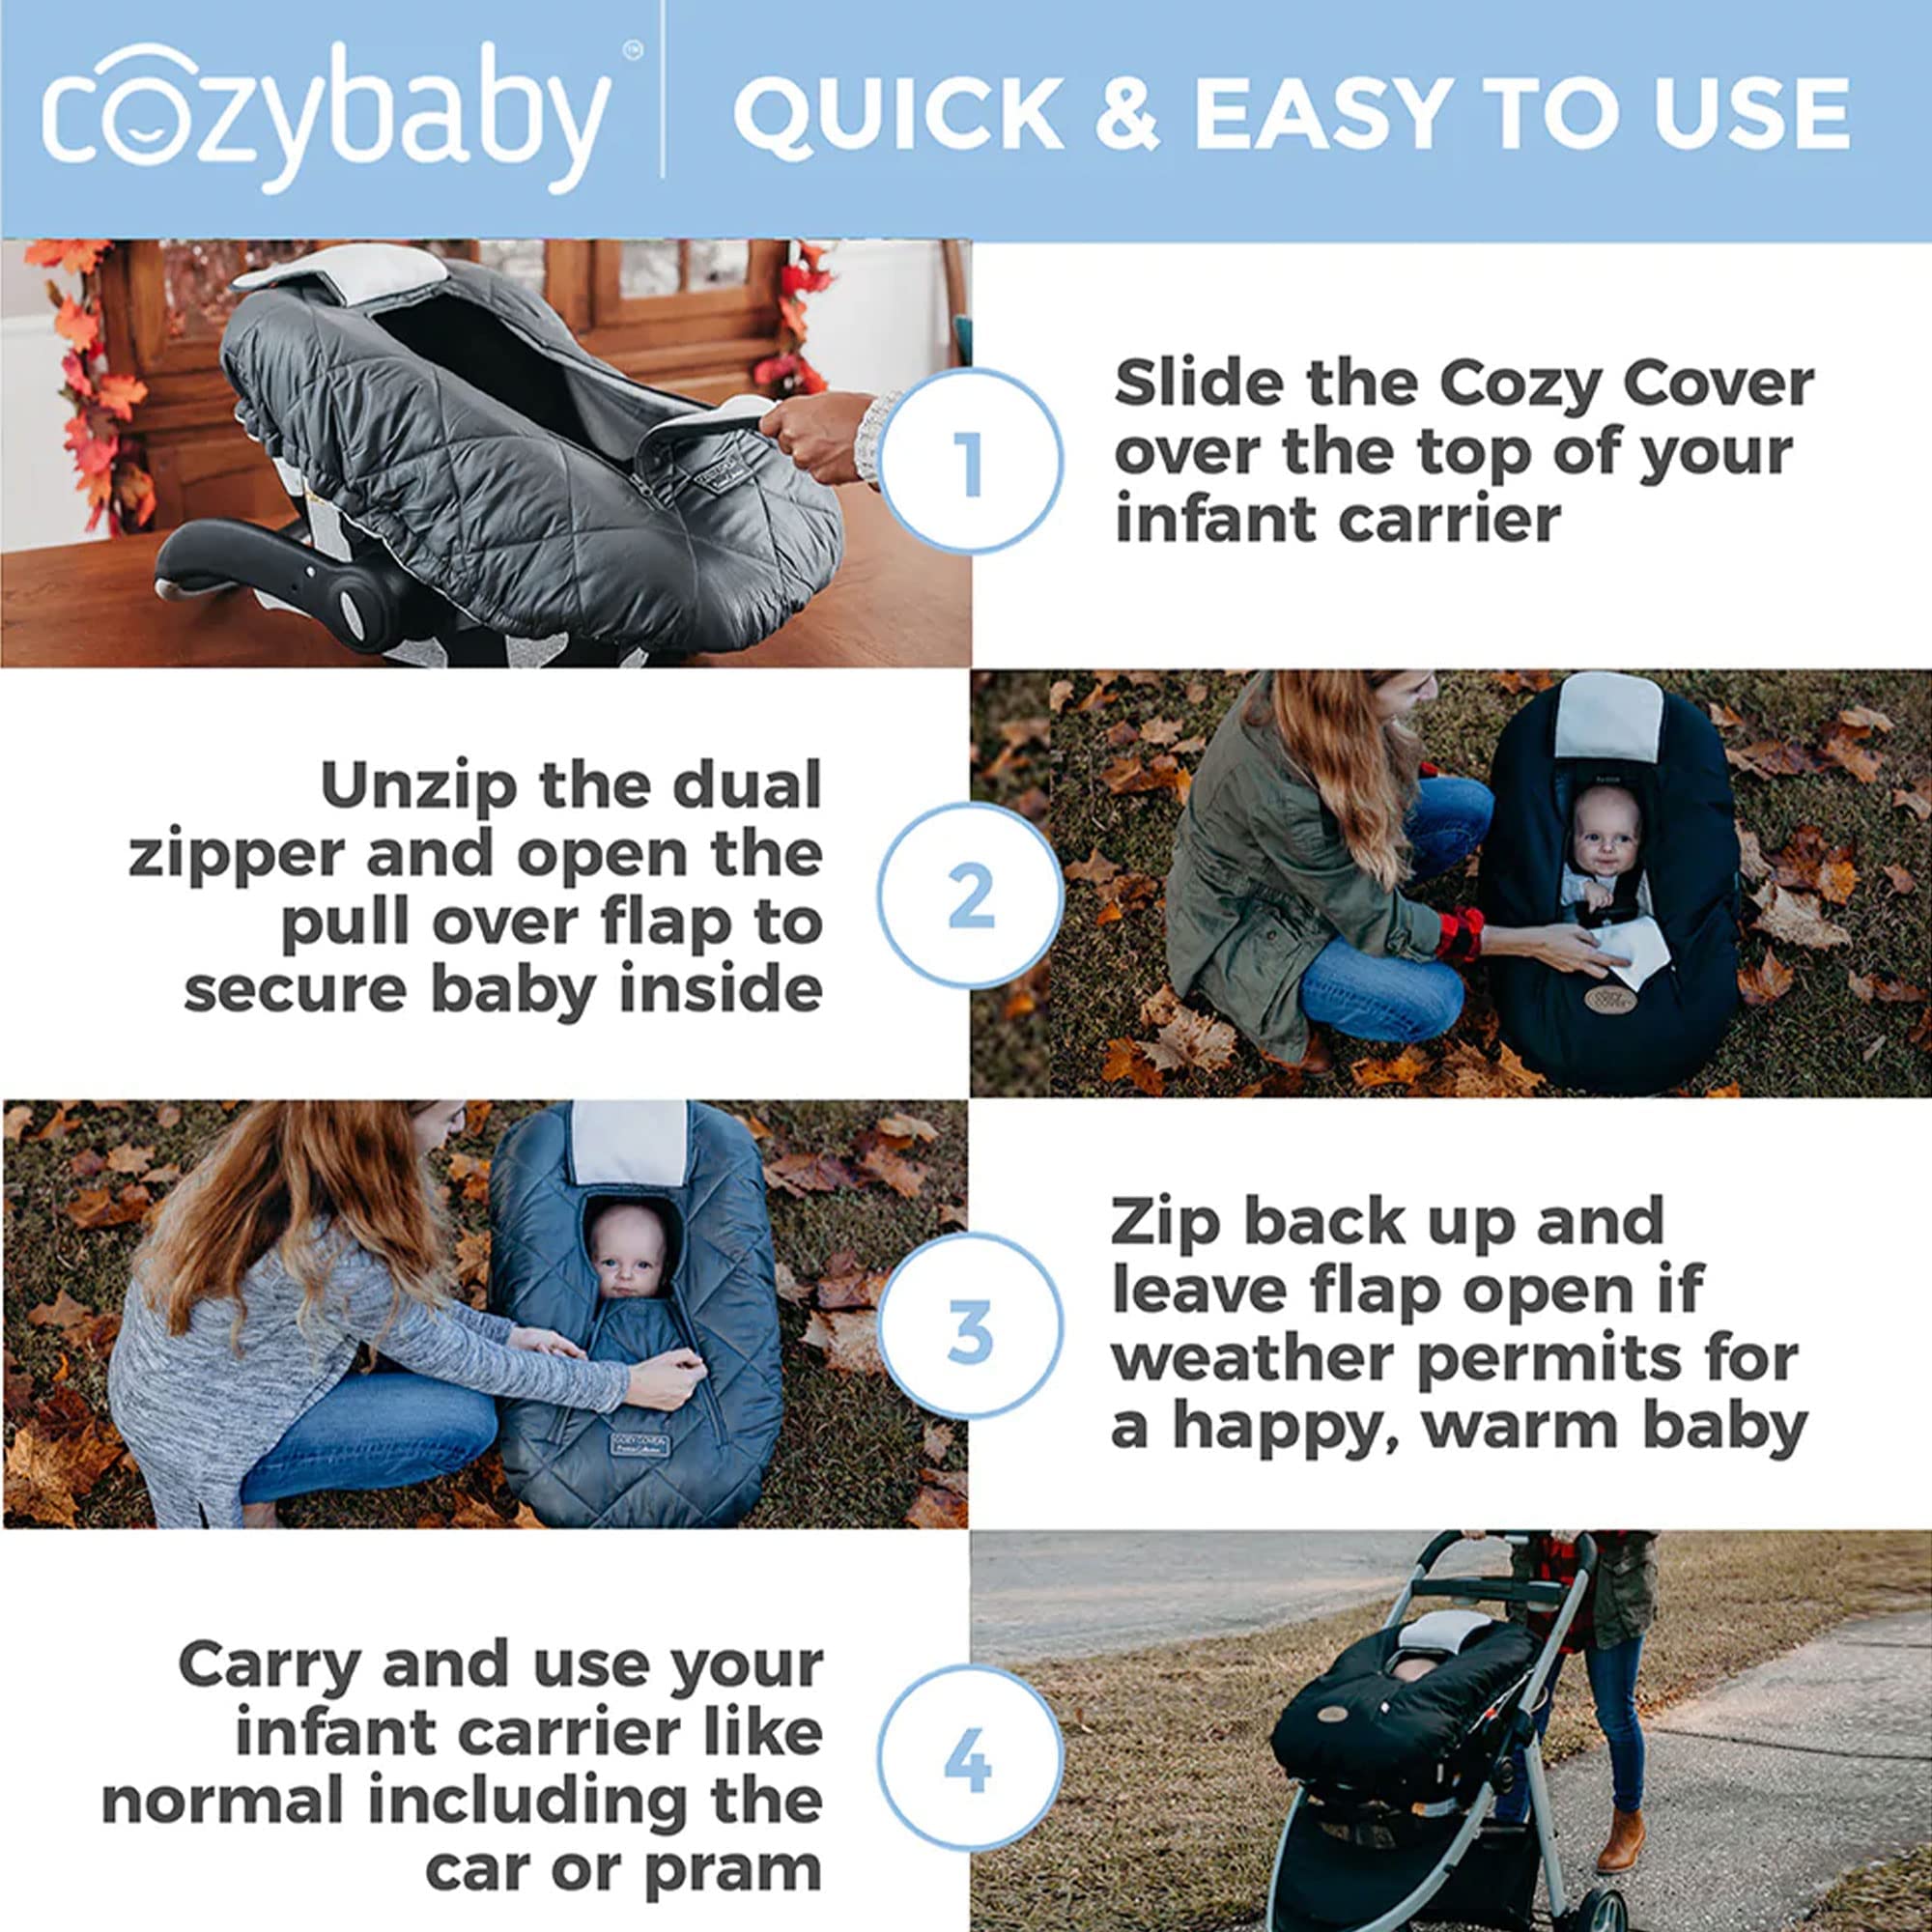 Cozy Cover Infant Car Seat Cover (Black Quilt) - The Industry Leading Infant Carrier Cover Trusted by Over 6 Million Moms Worldwide for Keeping Your Baby Cozy & Warm